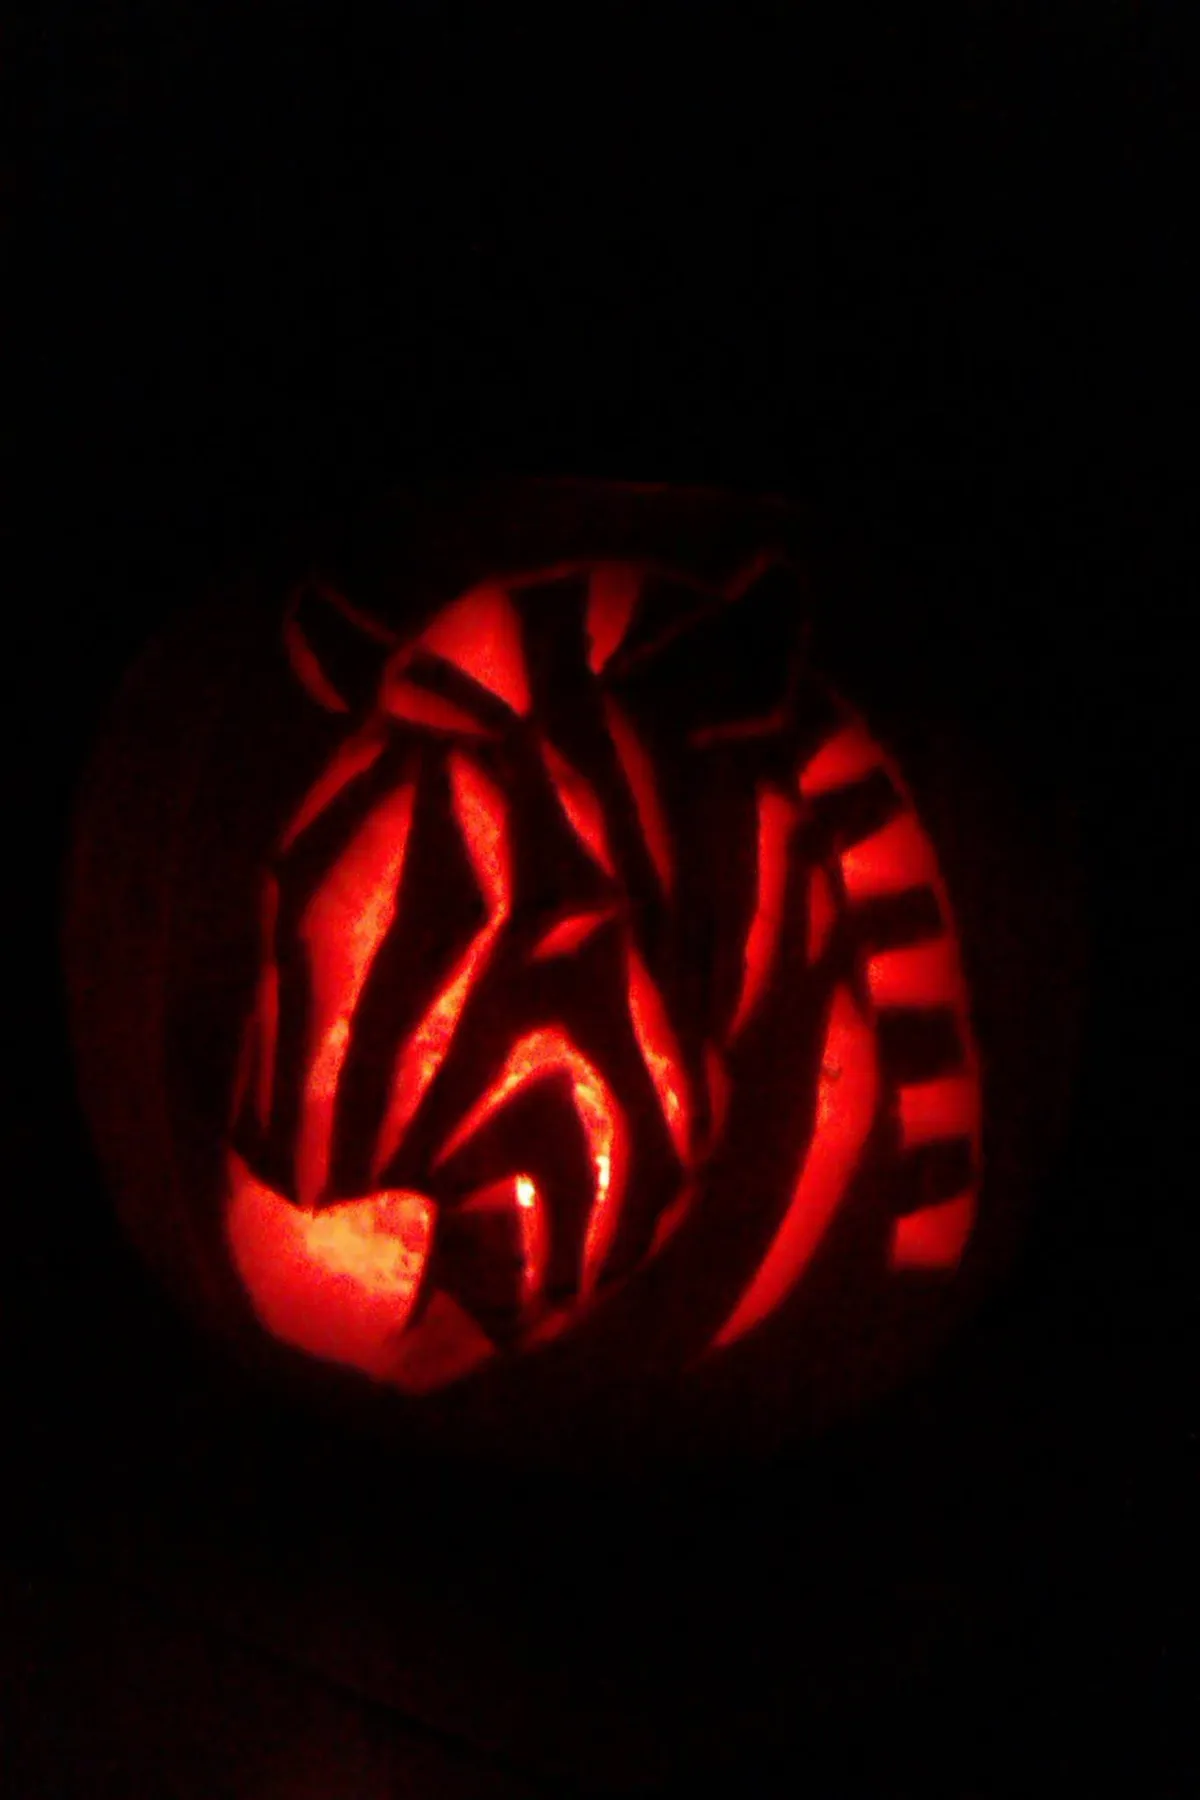 A pumpkin in the dark, lit up from within, showing a zebra's head pattern carved into the pumpkin